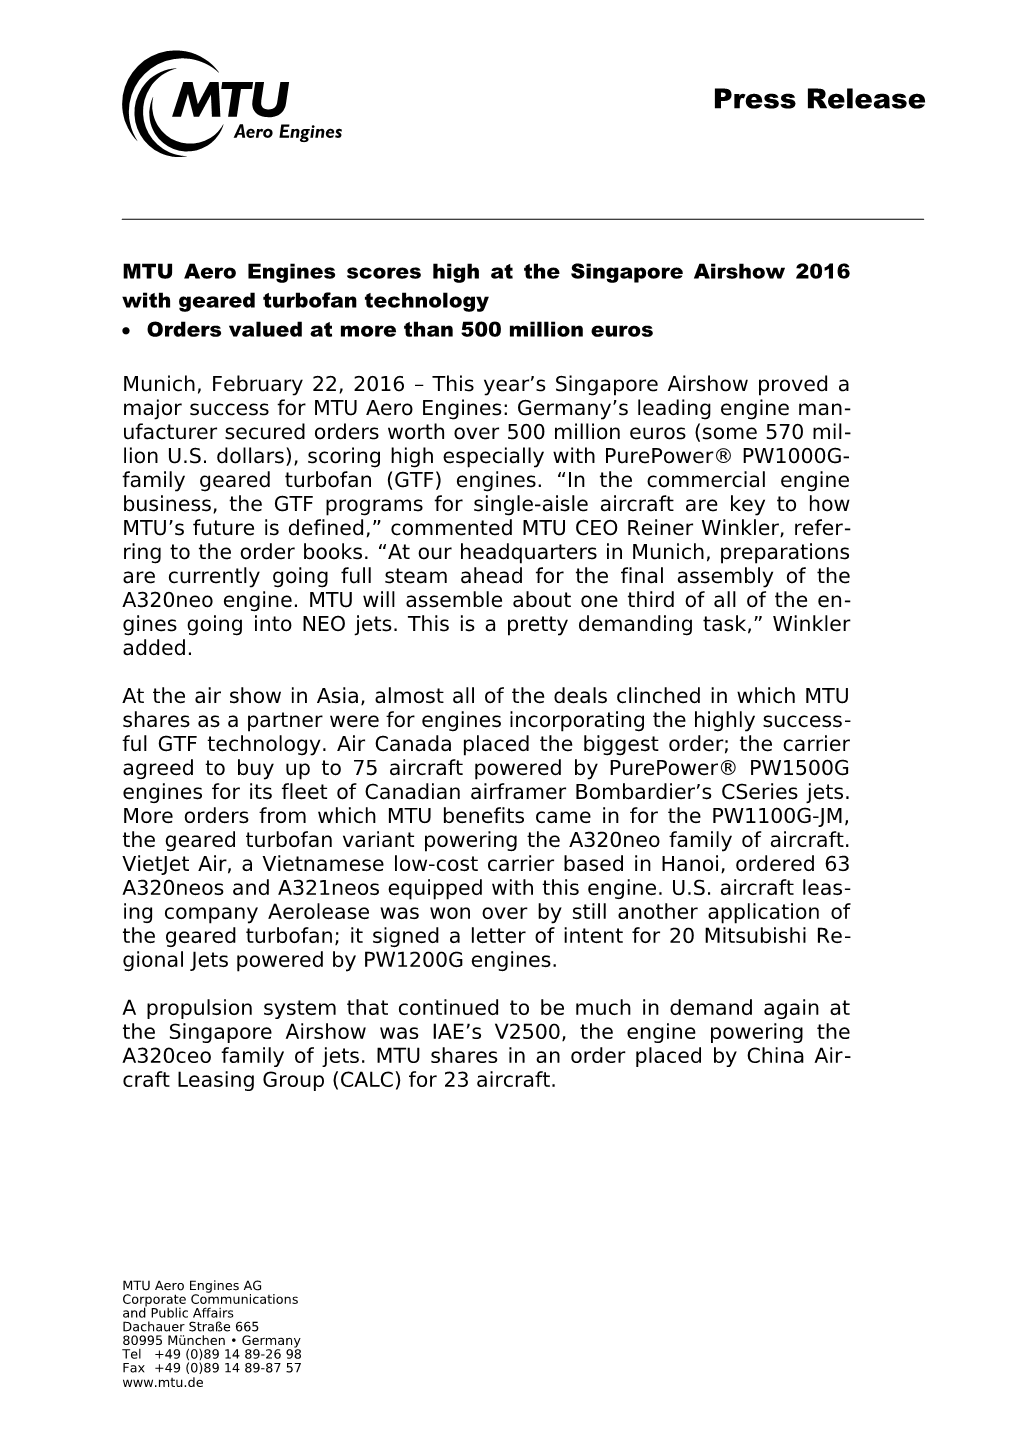 MTU Aero Engines Scores High at the Singapore Airshow 2016 with Geared Turbofan Technology